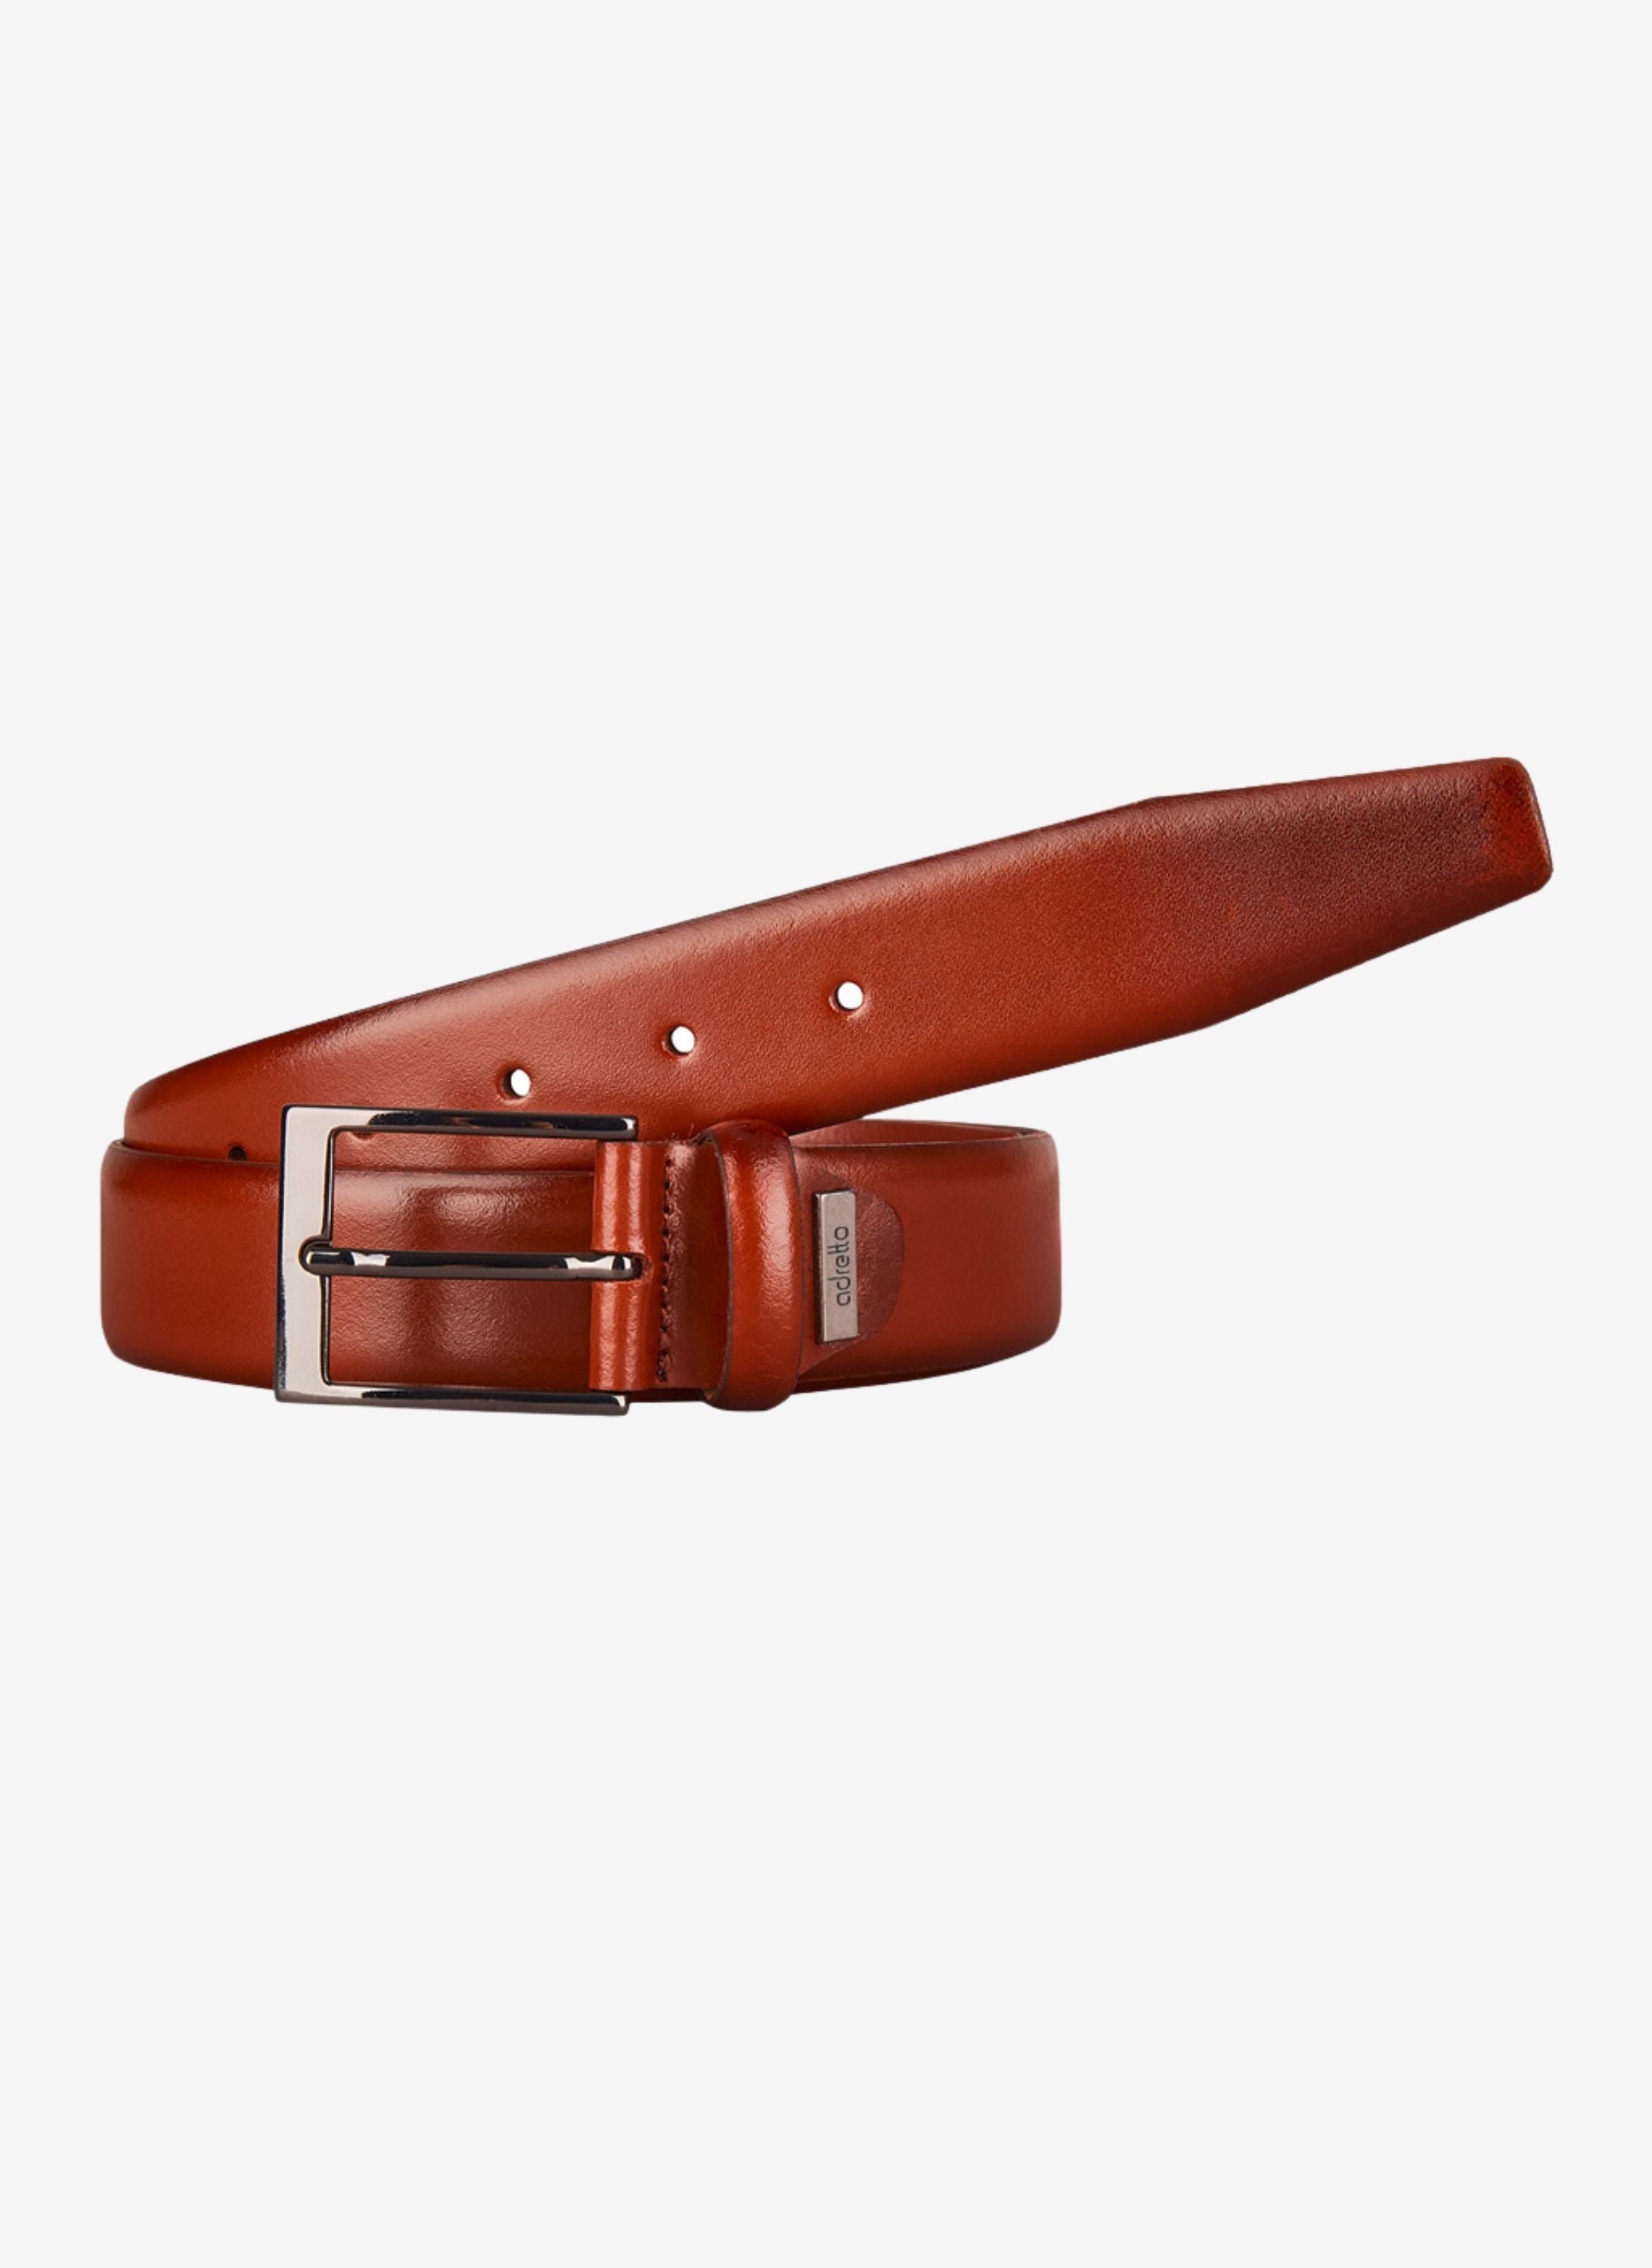 Leather & your stylish belt for suit | - for in men timeless brown